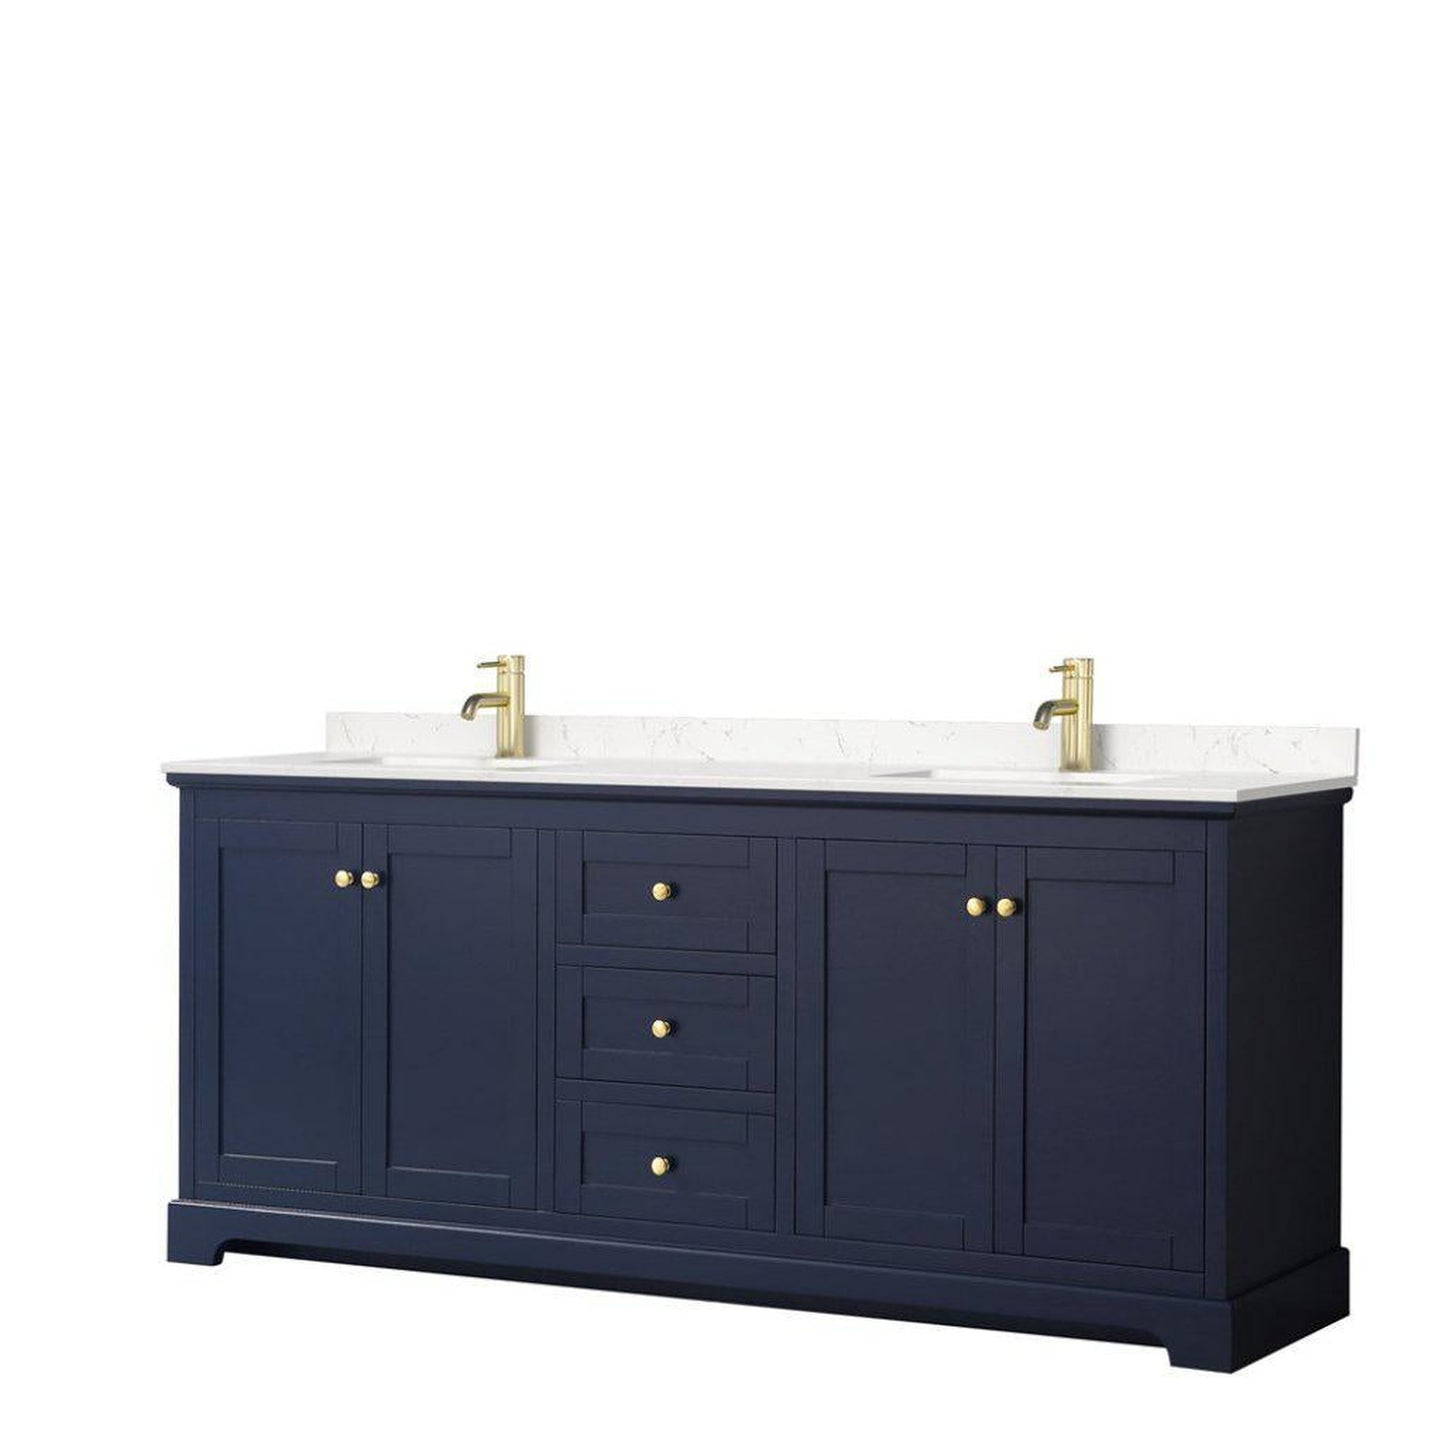 Wyndham Collection Avery 80" Dark Blue Double Bathroom Vanity With Light-Vein Cultured Marble Countertop With 1-Hole Faucet And Square Sink